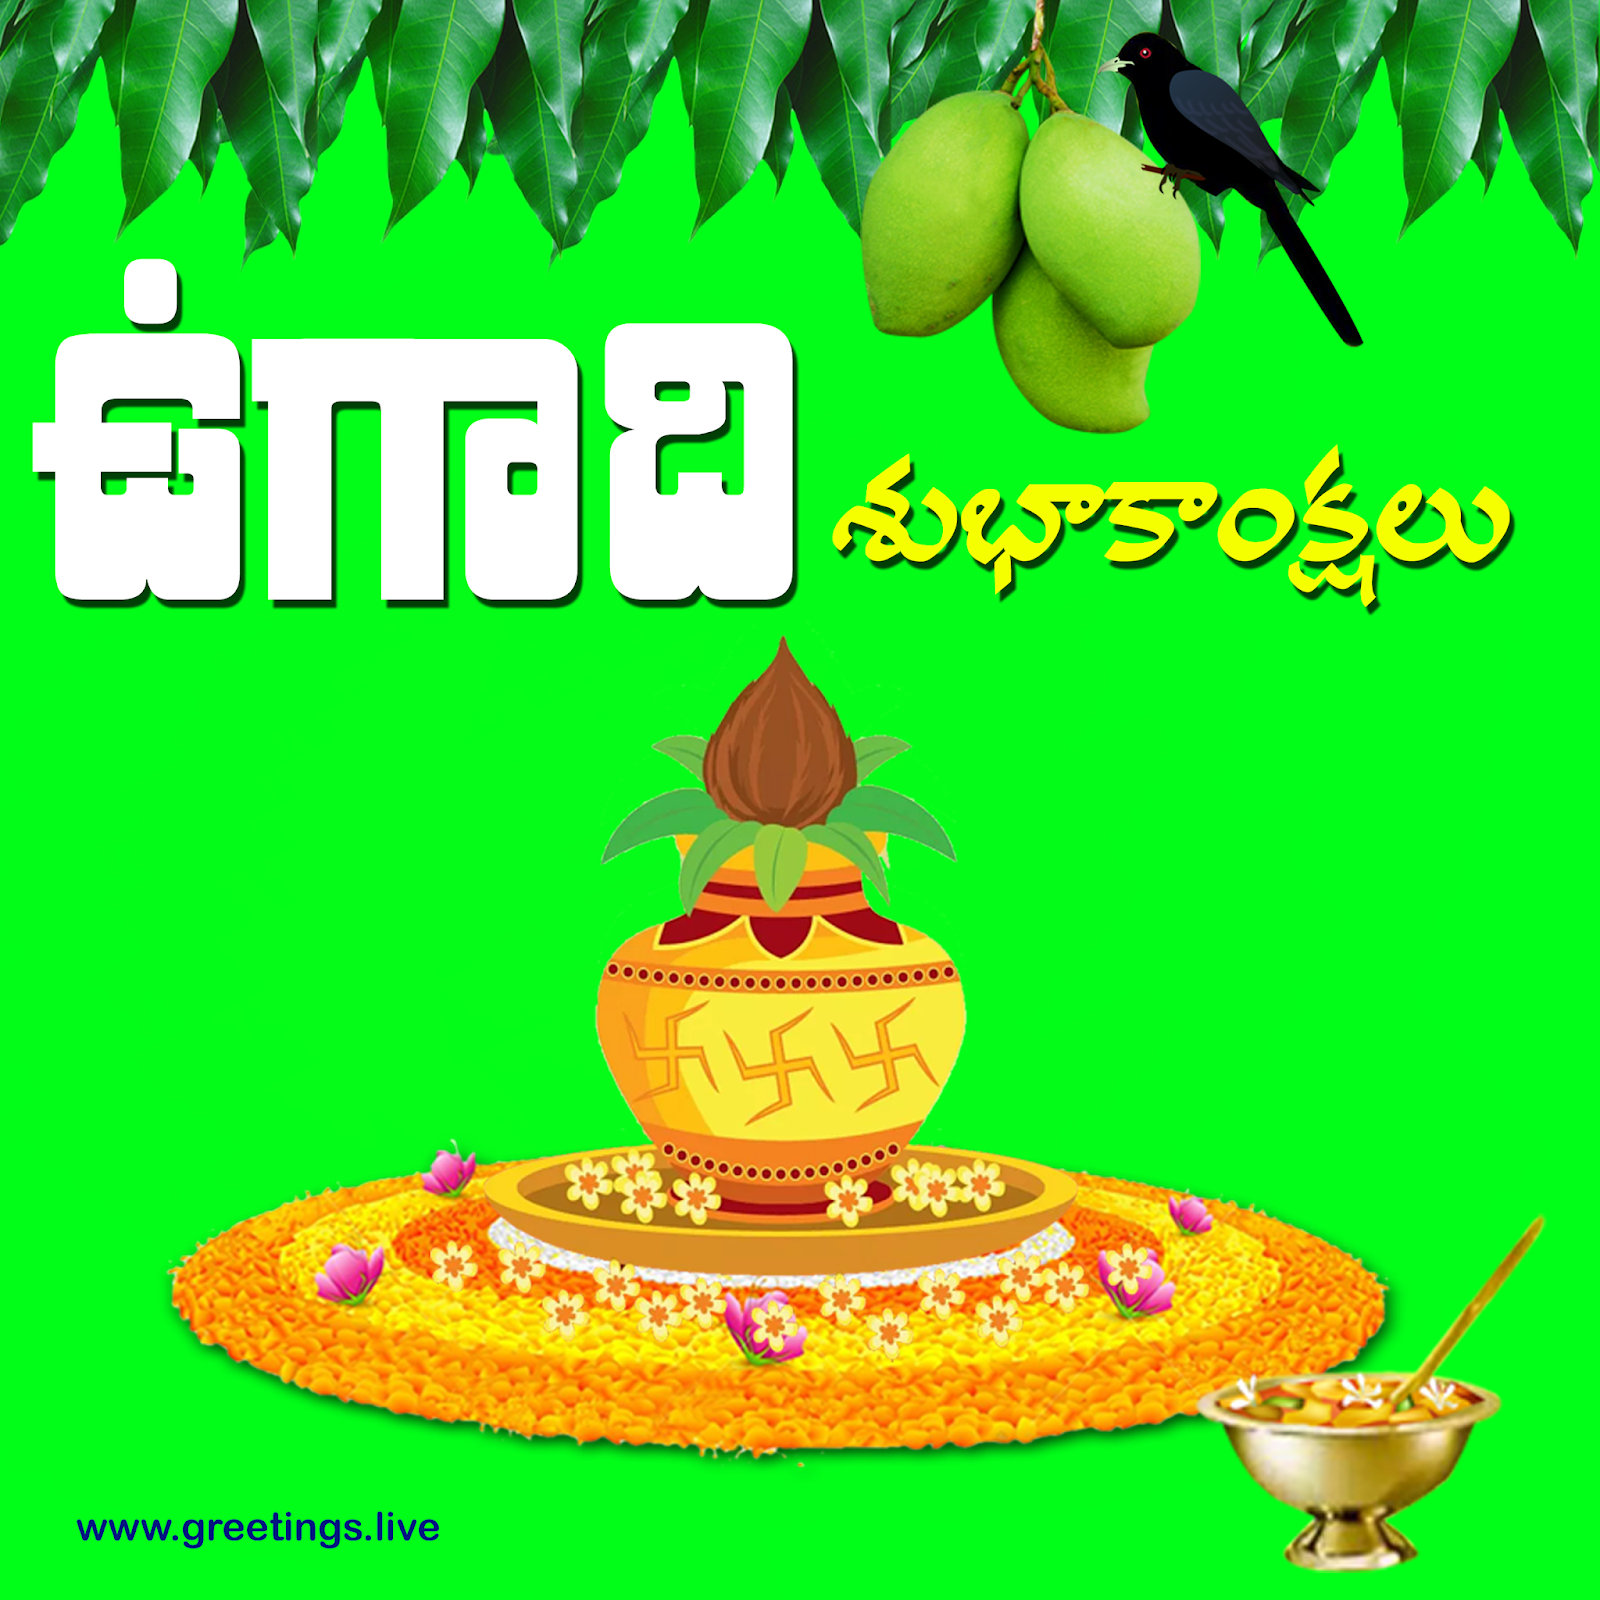 Greetings.Live*Free Daily Greetings Pictures Festival GIF Images: Ugadi